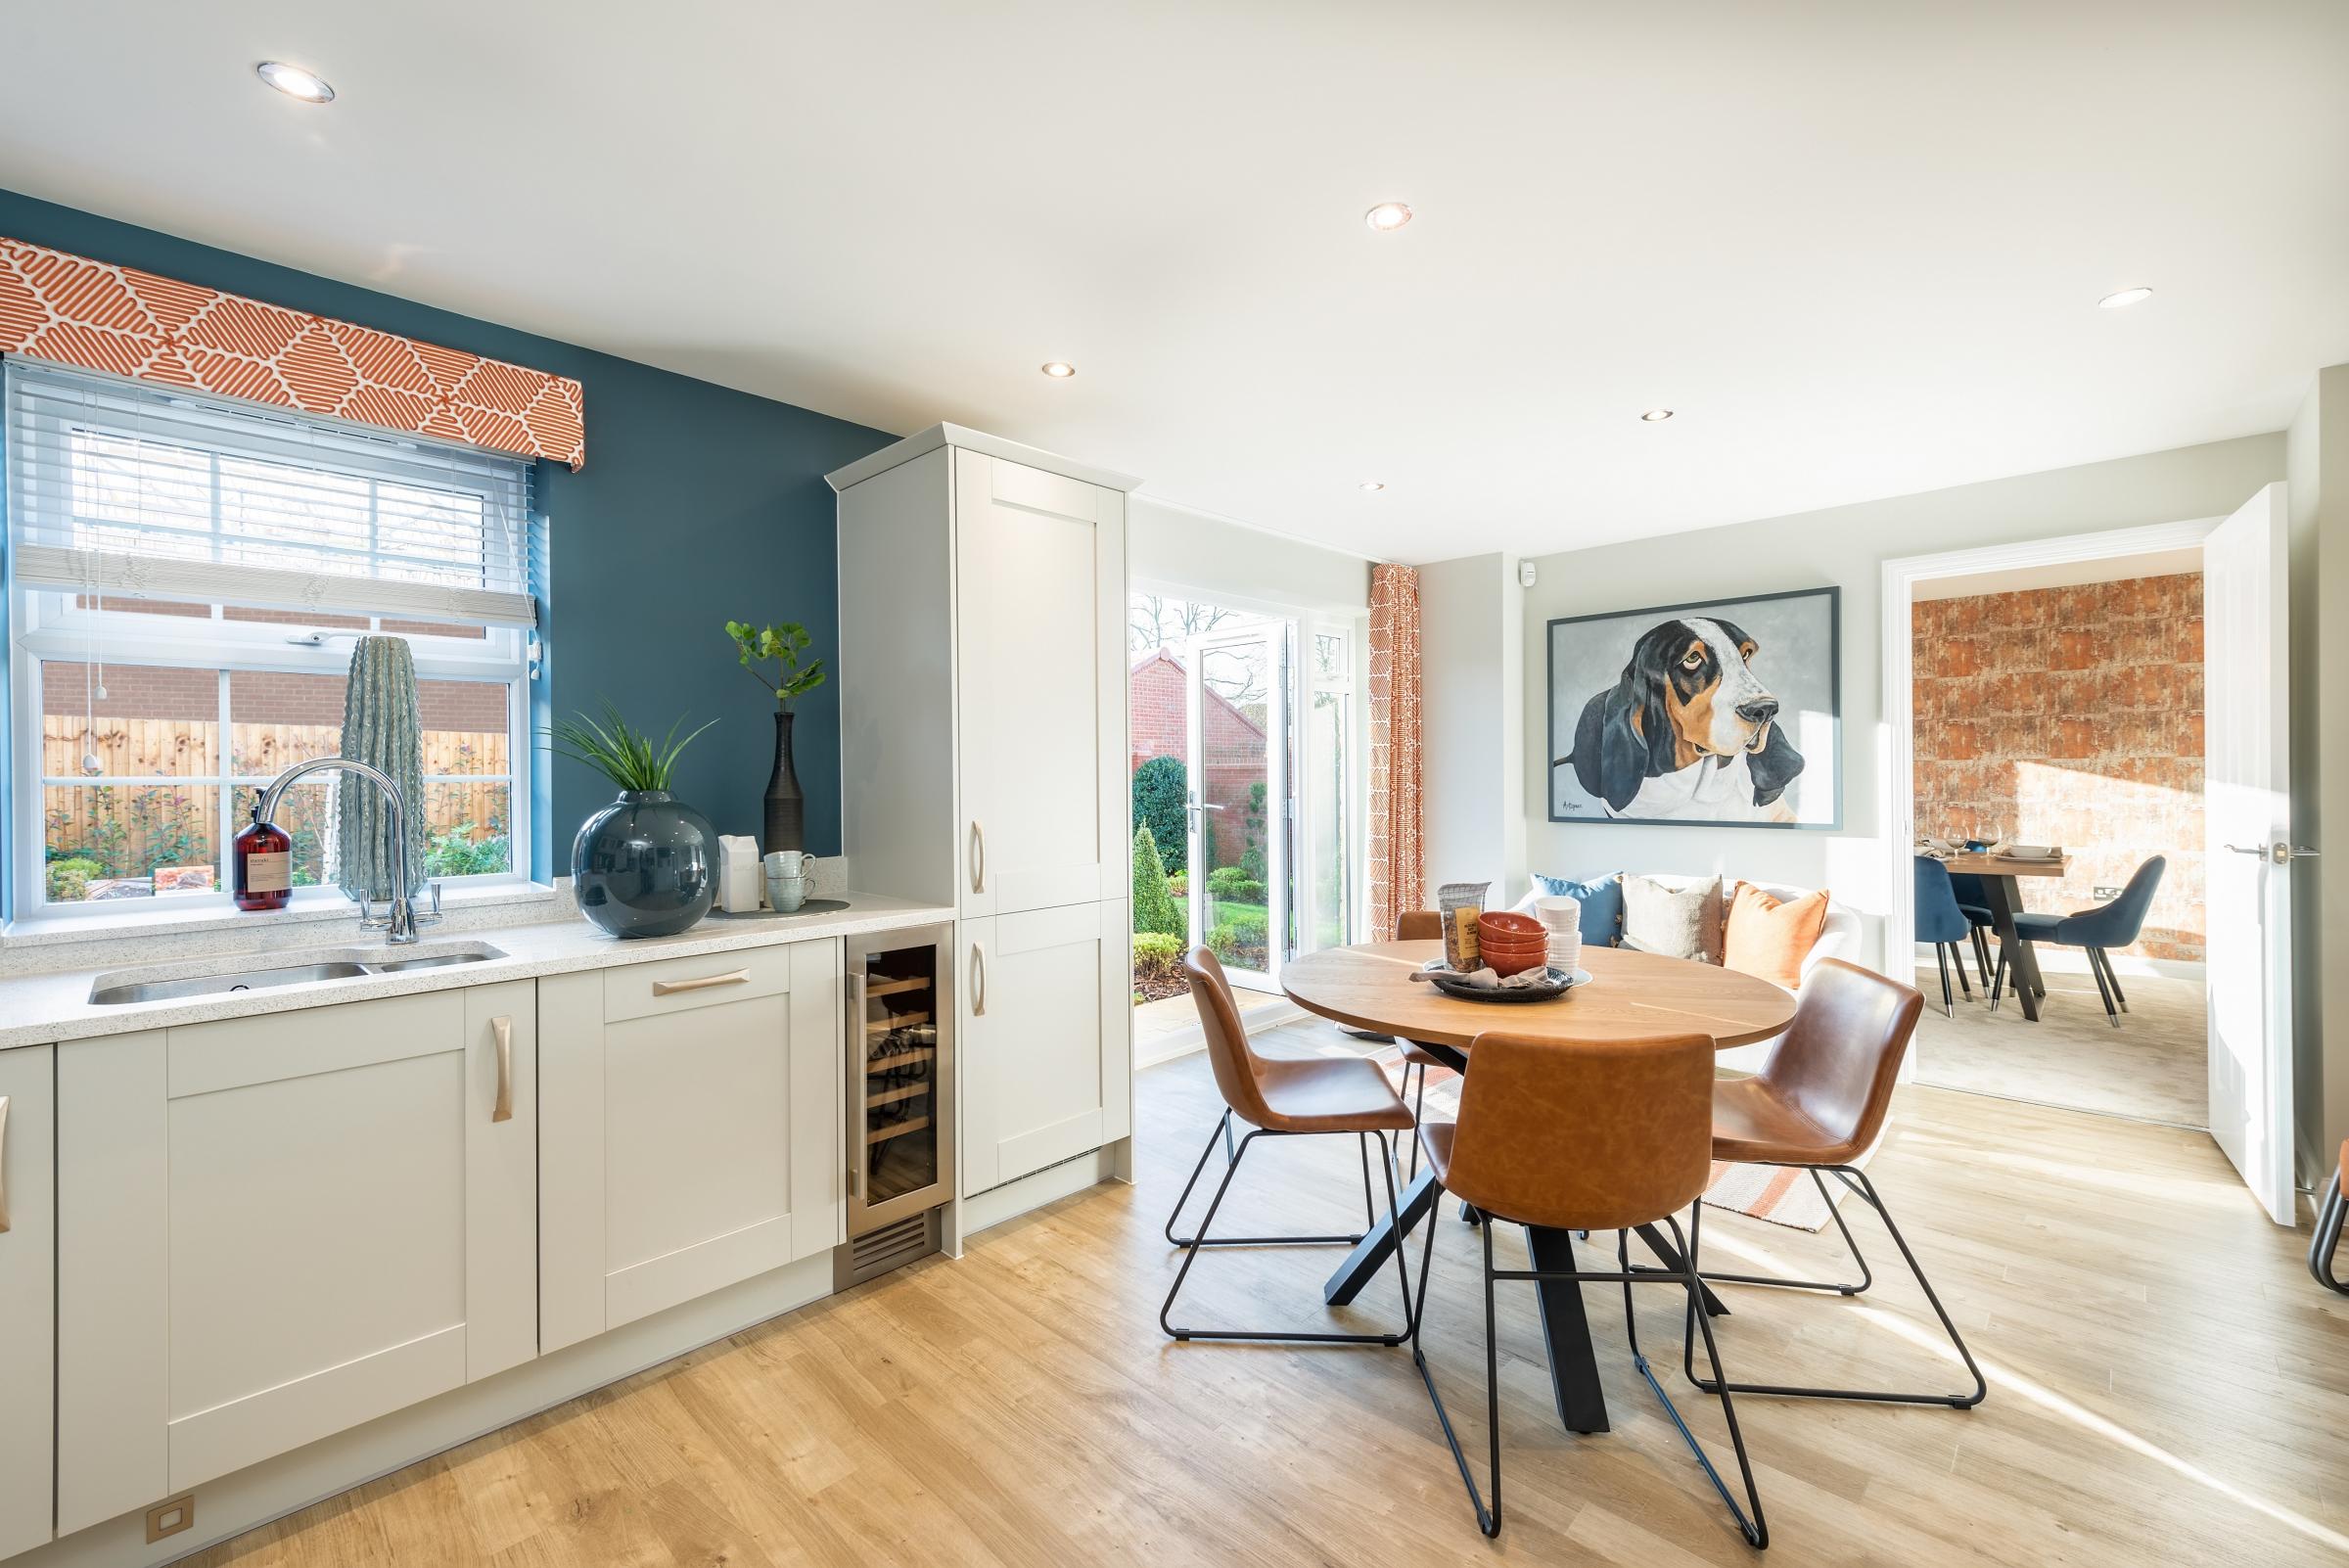 A kitchen and dining area in the show home (www.andrewhatfield.co.uk)